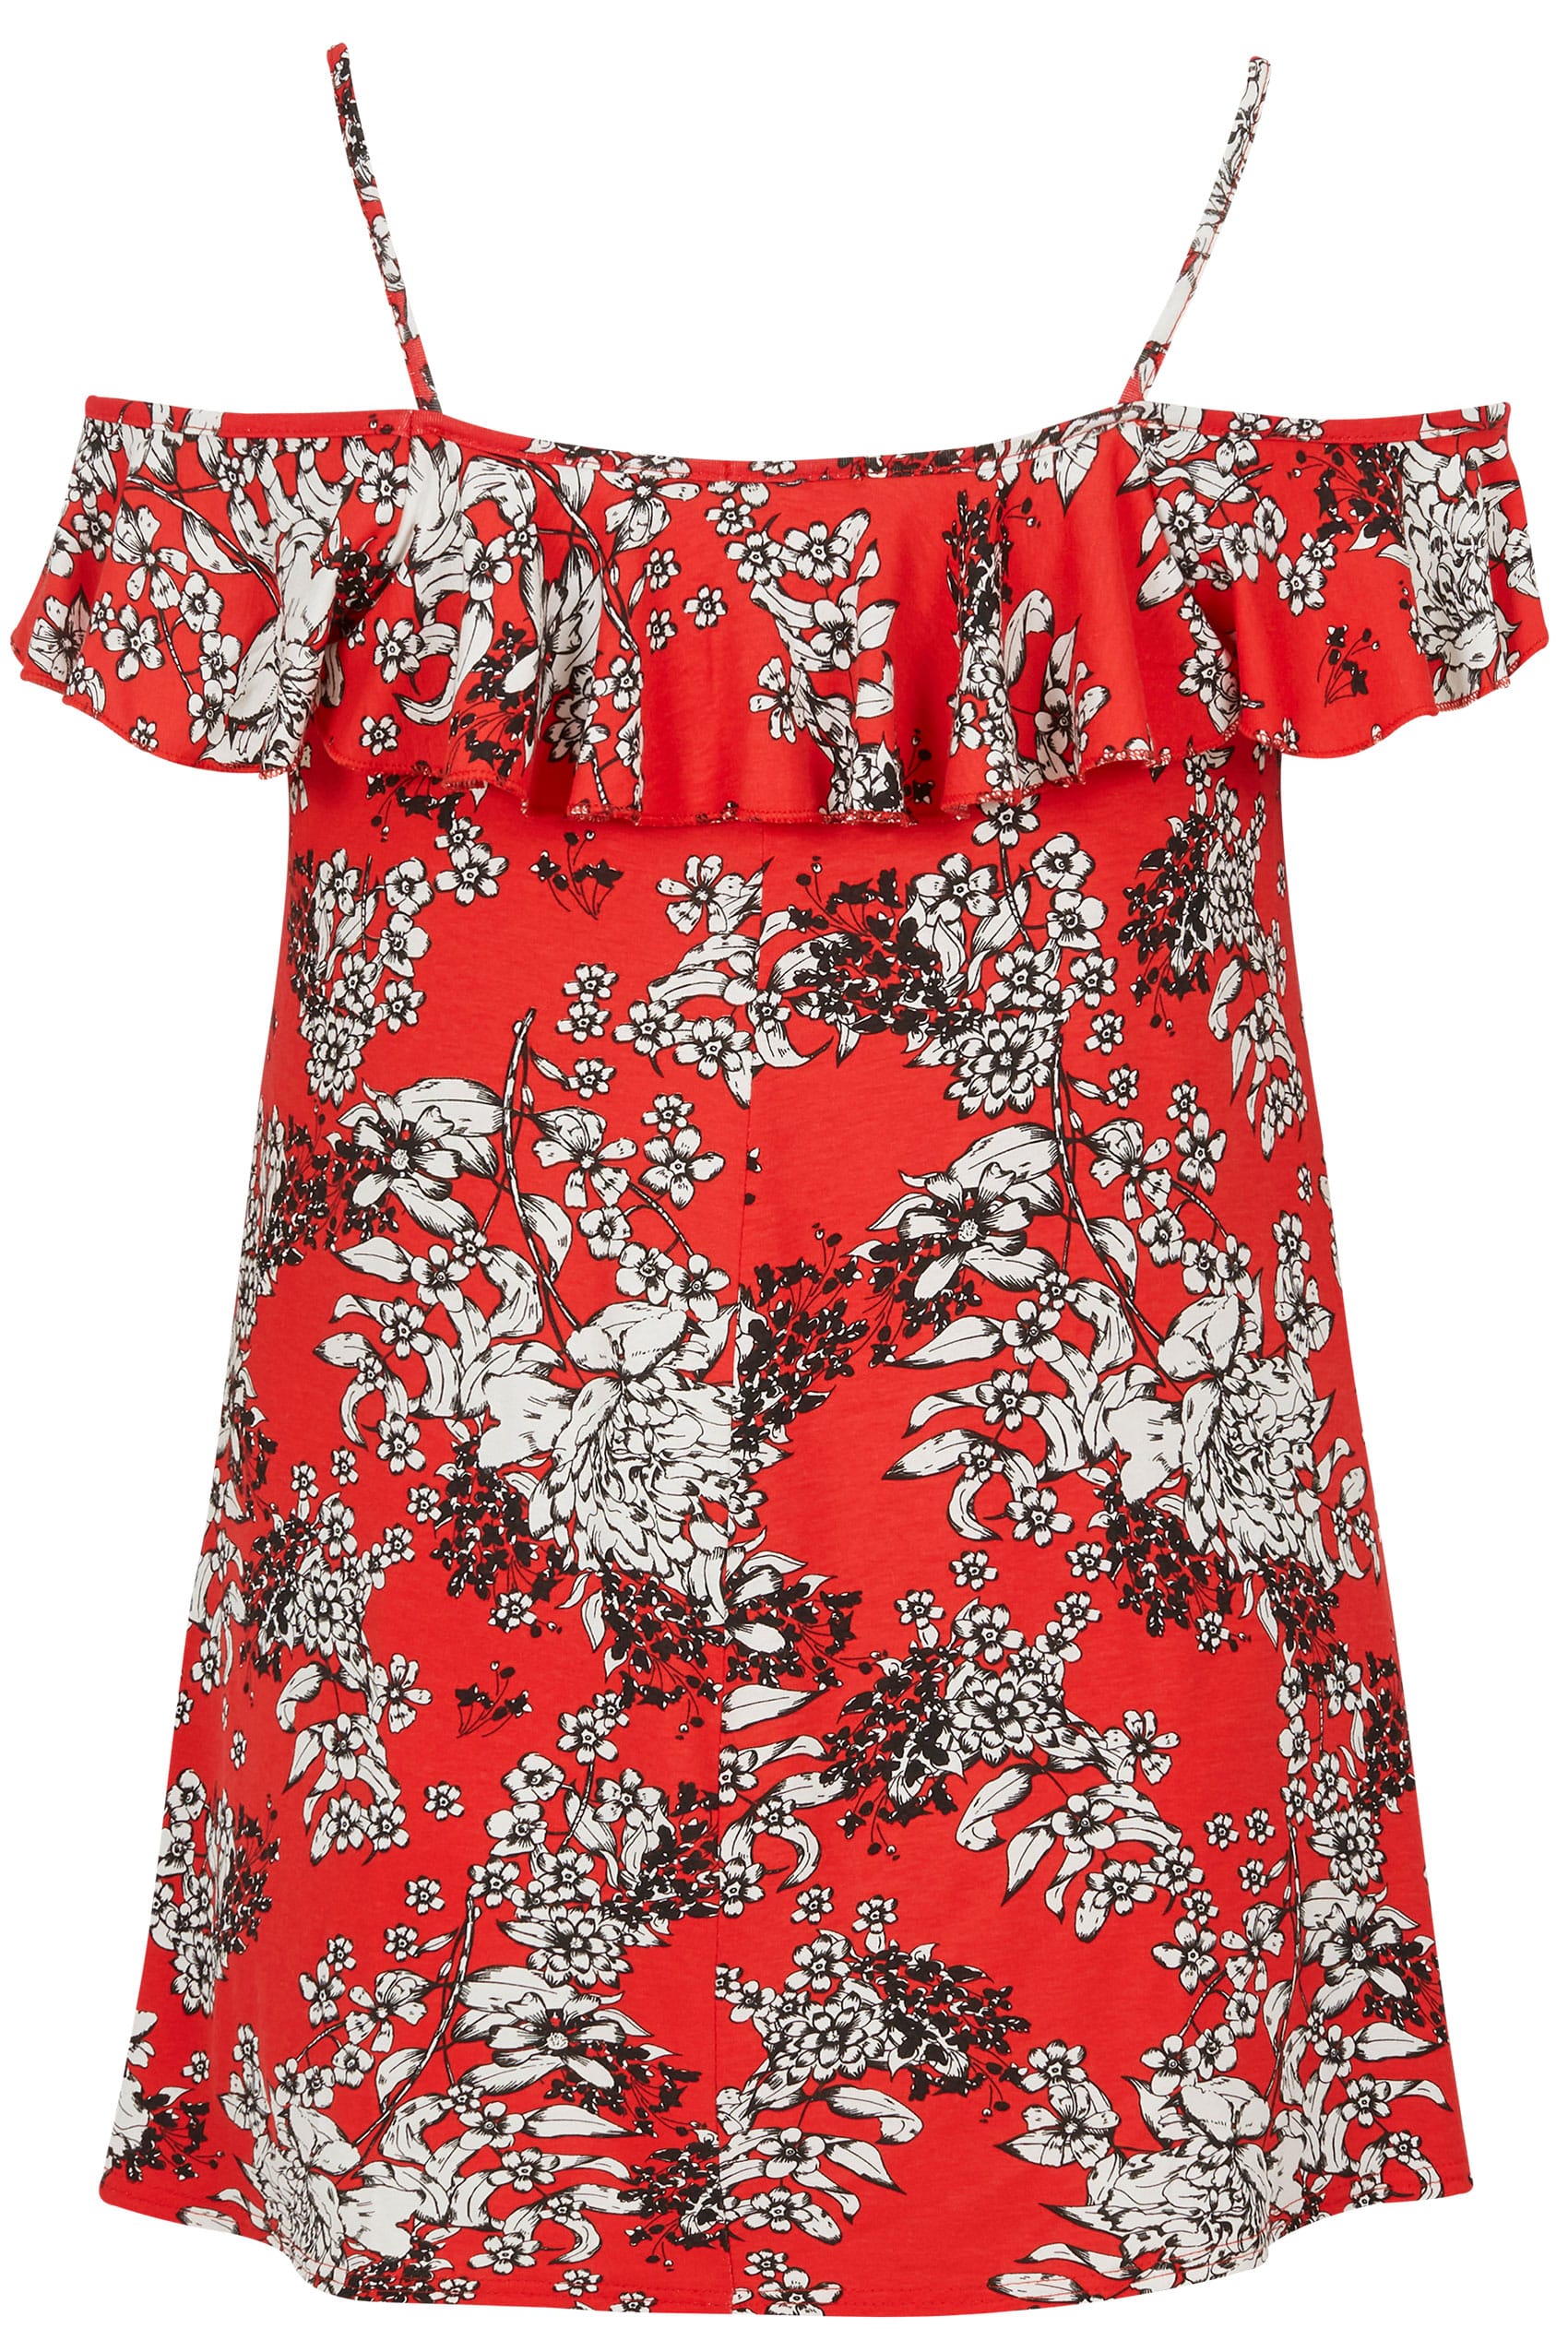 Red Floral Print Frilled Cold Shoulder Top, plus size 16 to 36